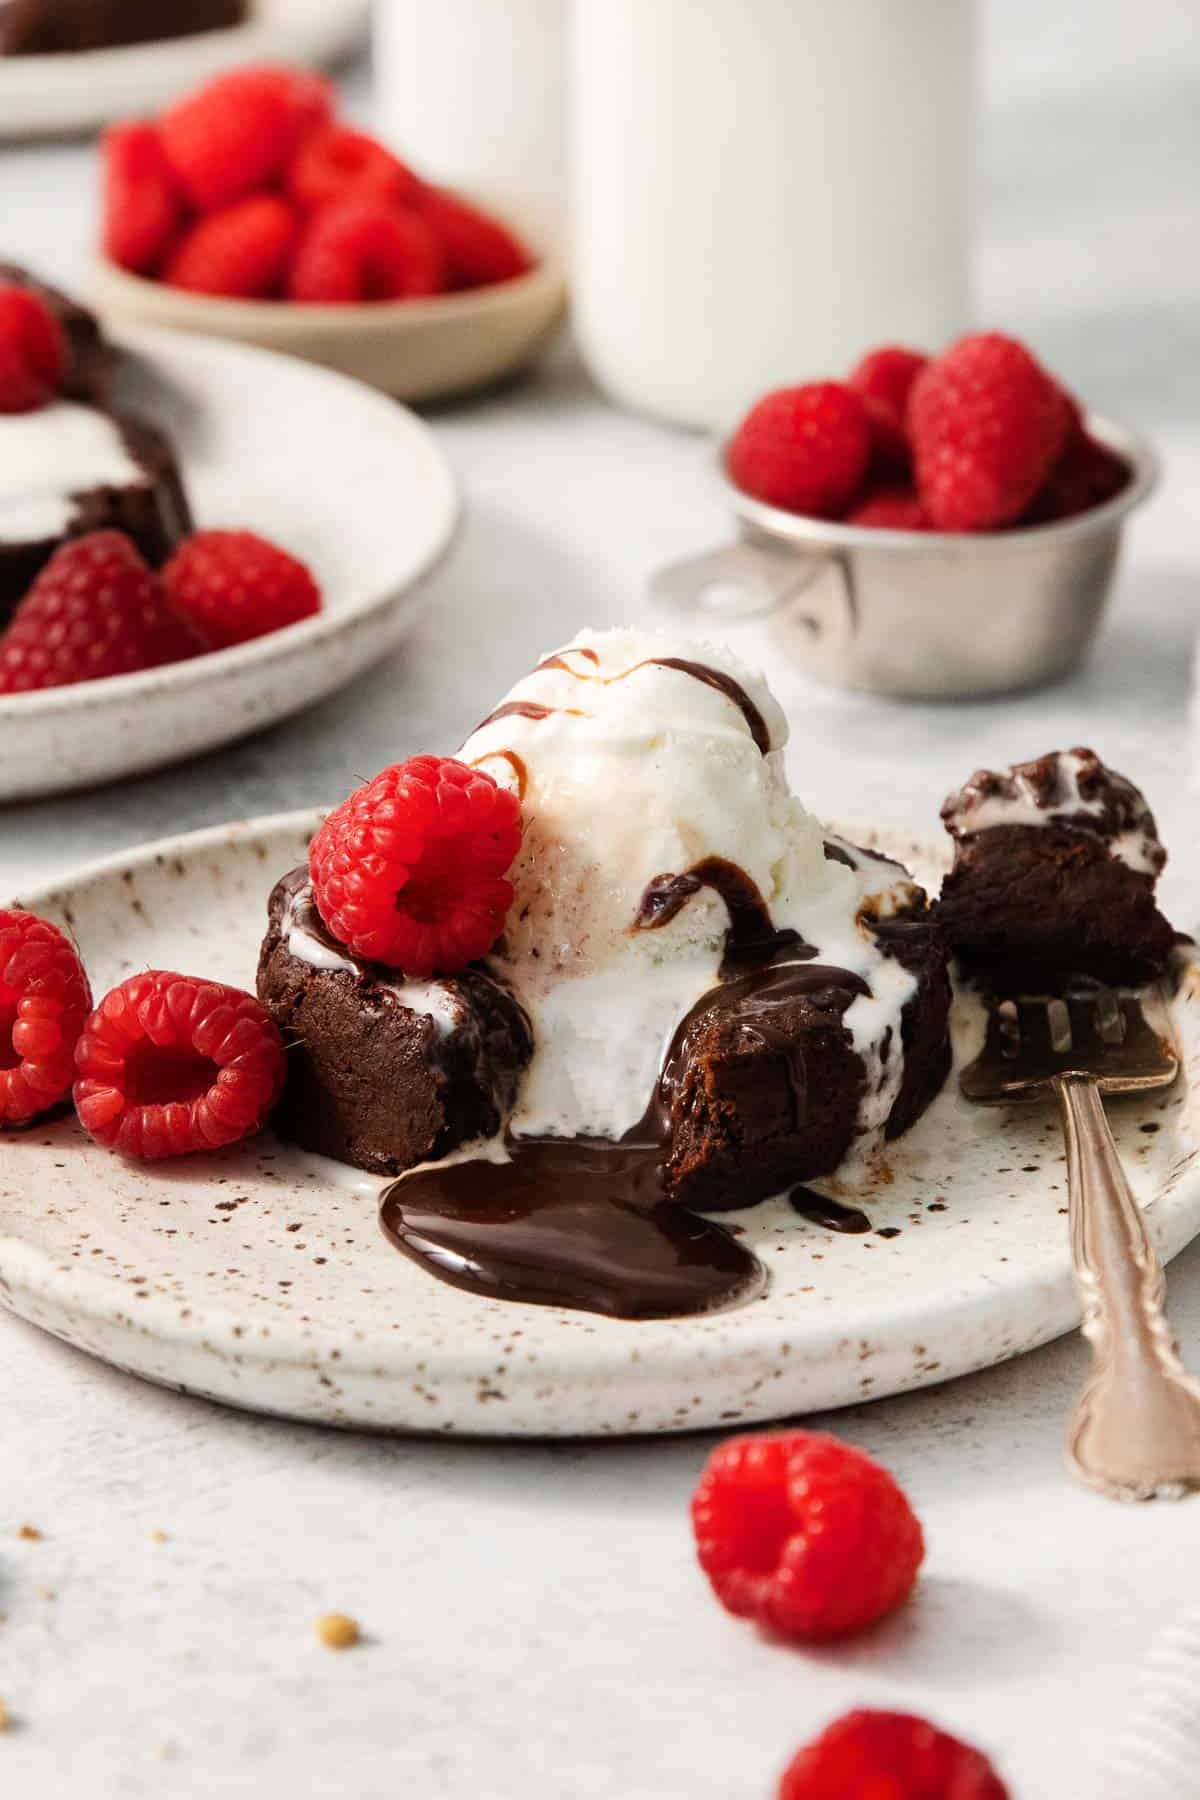 gluten-free chocolate lava cake on a plate with a fork taking a bite out of it